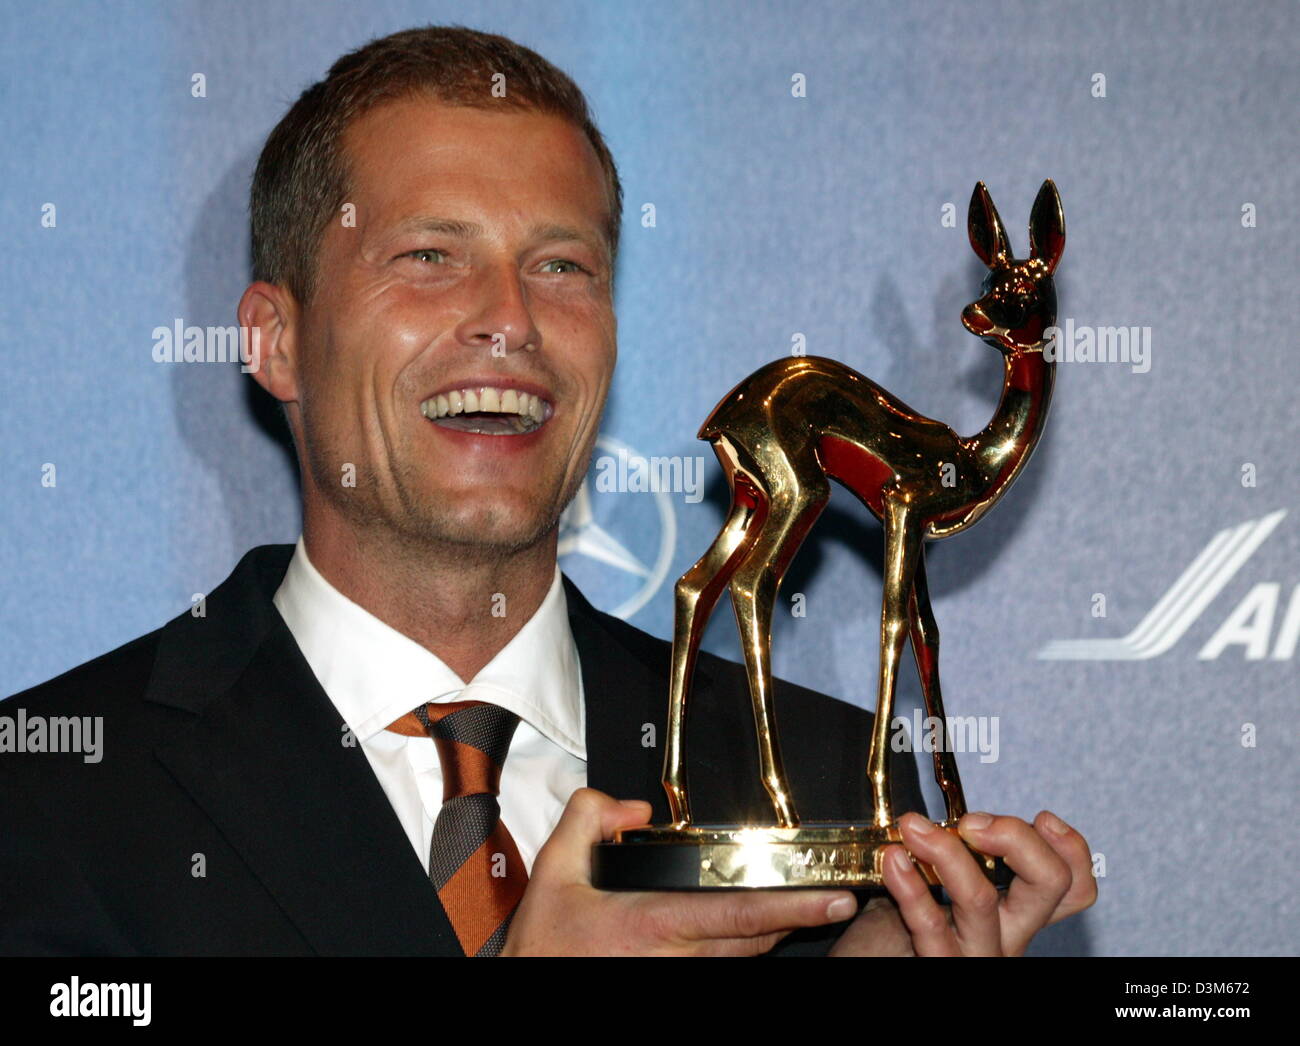 (dpa) - German actor Til Schweiger smiles as he poses with his Bambi Award trophy at the Bambi Awards show at the ICM fair centre in Munich, Germany, Thursday, 01 December 2005. A-list and B-list celebrities arrived to the 57th Bambi Awards show including around 1,000 invited guests fromthe world of business, society, politics and media. It is the first time in ten years that Munic Stock Photo